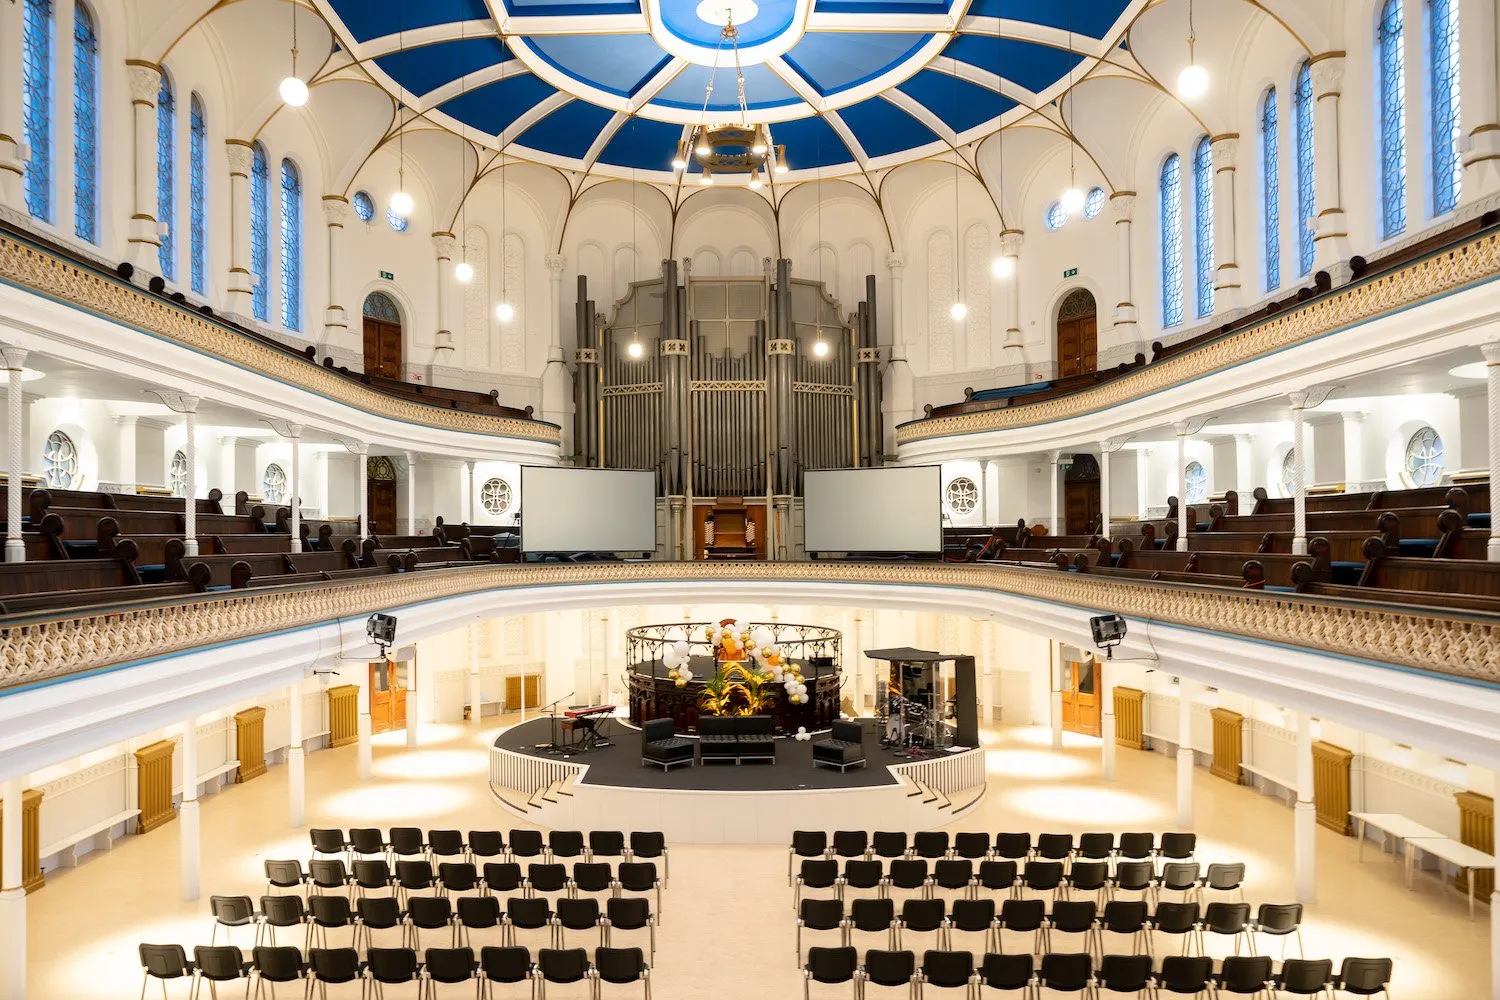 Main Hall and balconies with seating inside Westminster Chapel, London